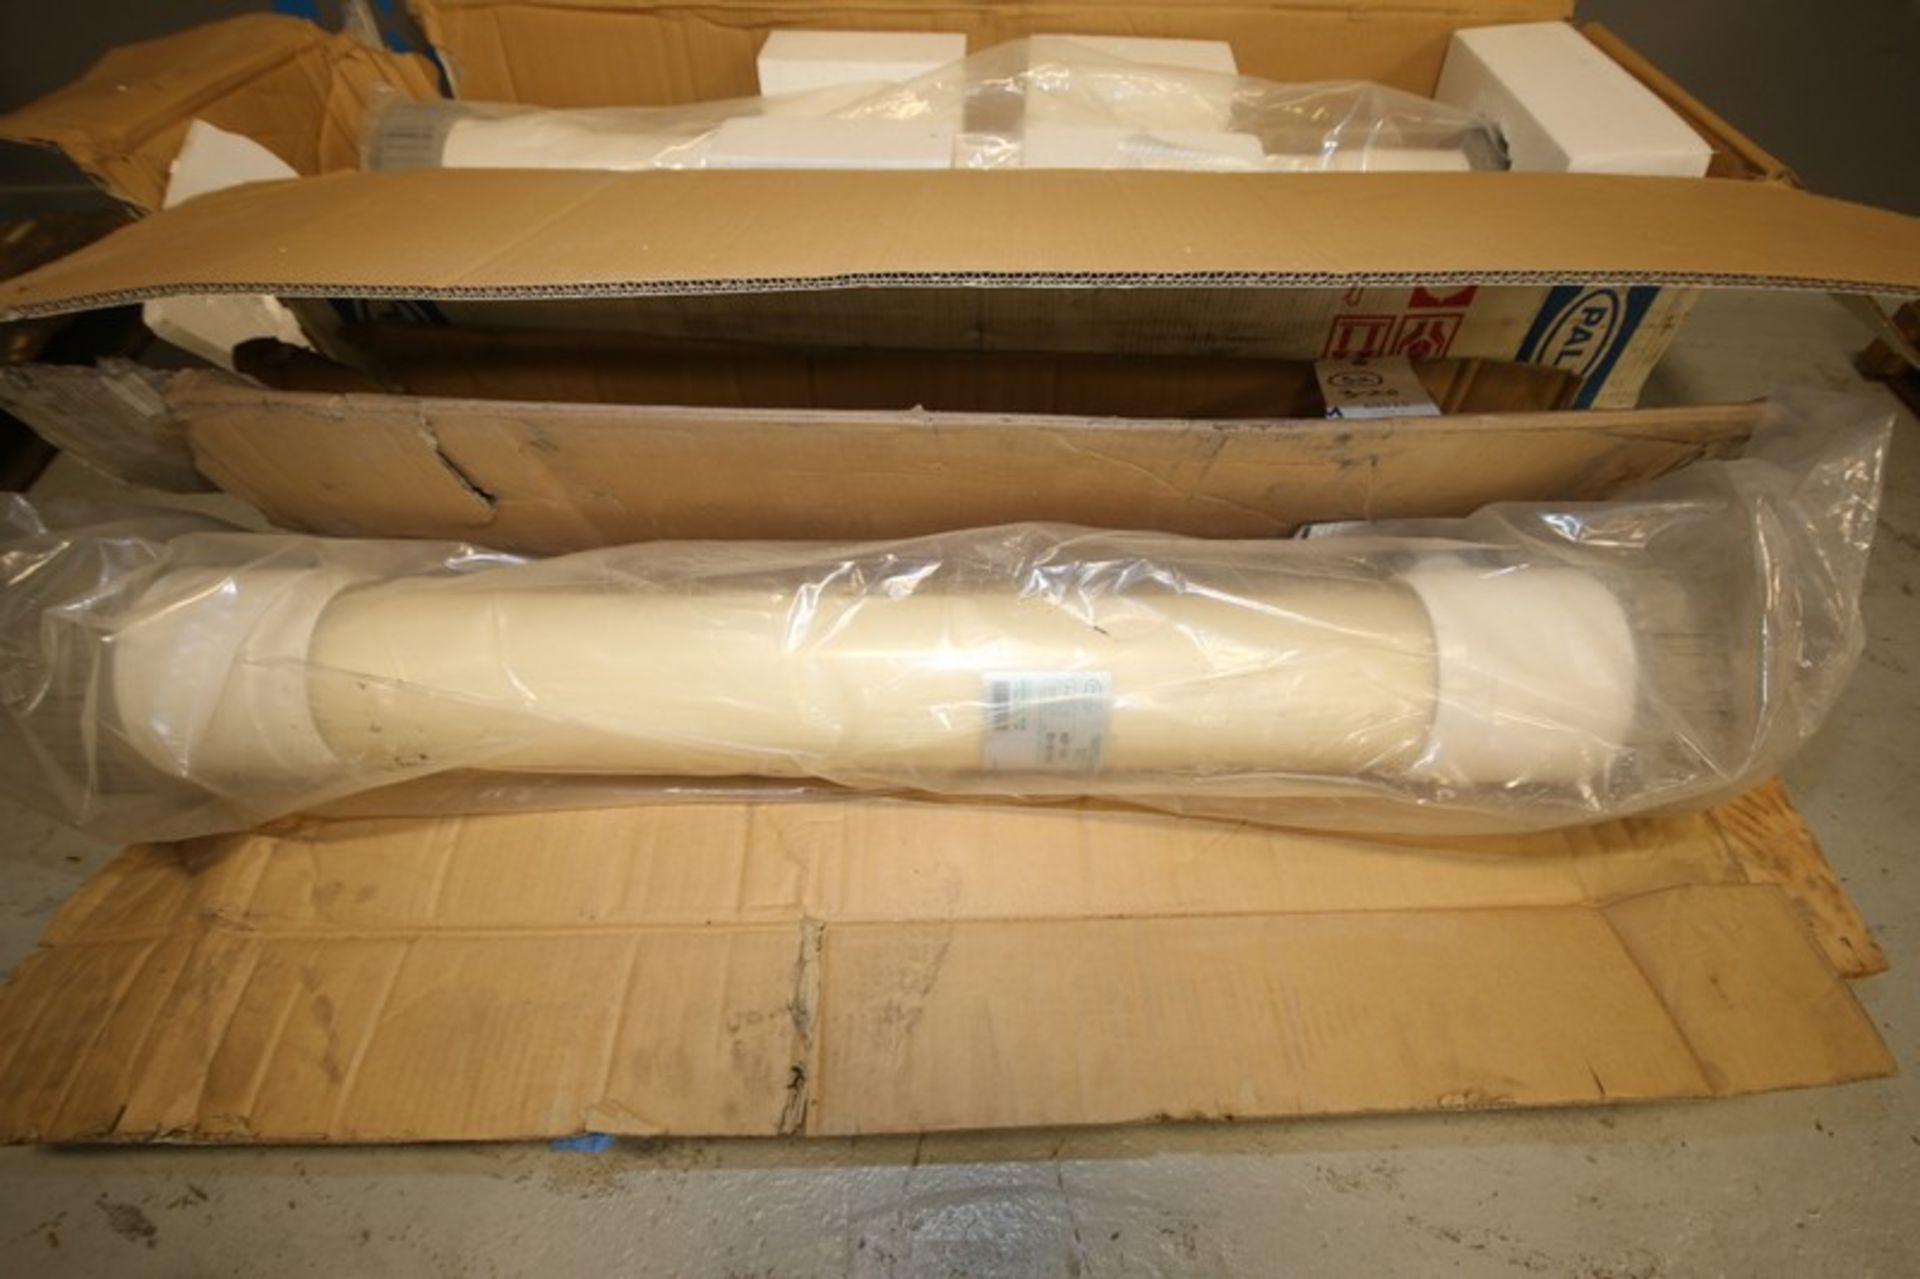 Lot of (2) Pall Microza Membranes, Part No. UMW-553 & WSP-543, 44" L with 3.5" Clamp Type Connection - Image 2 of 3